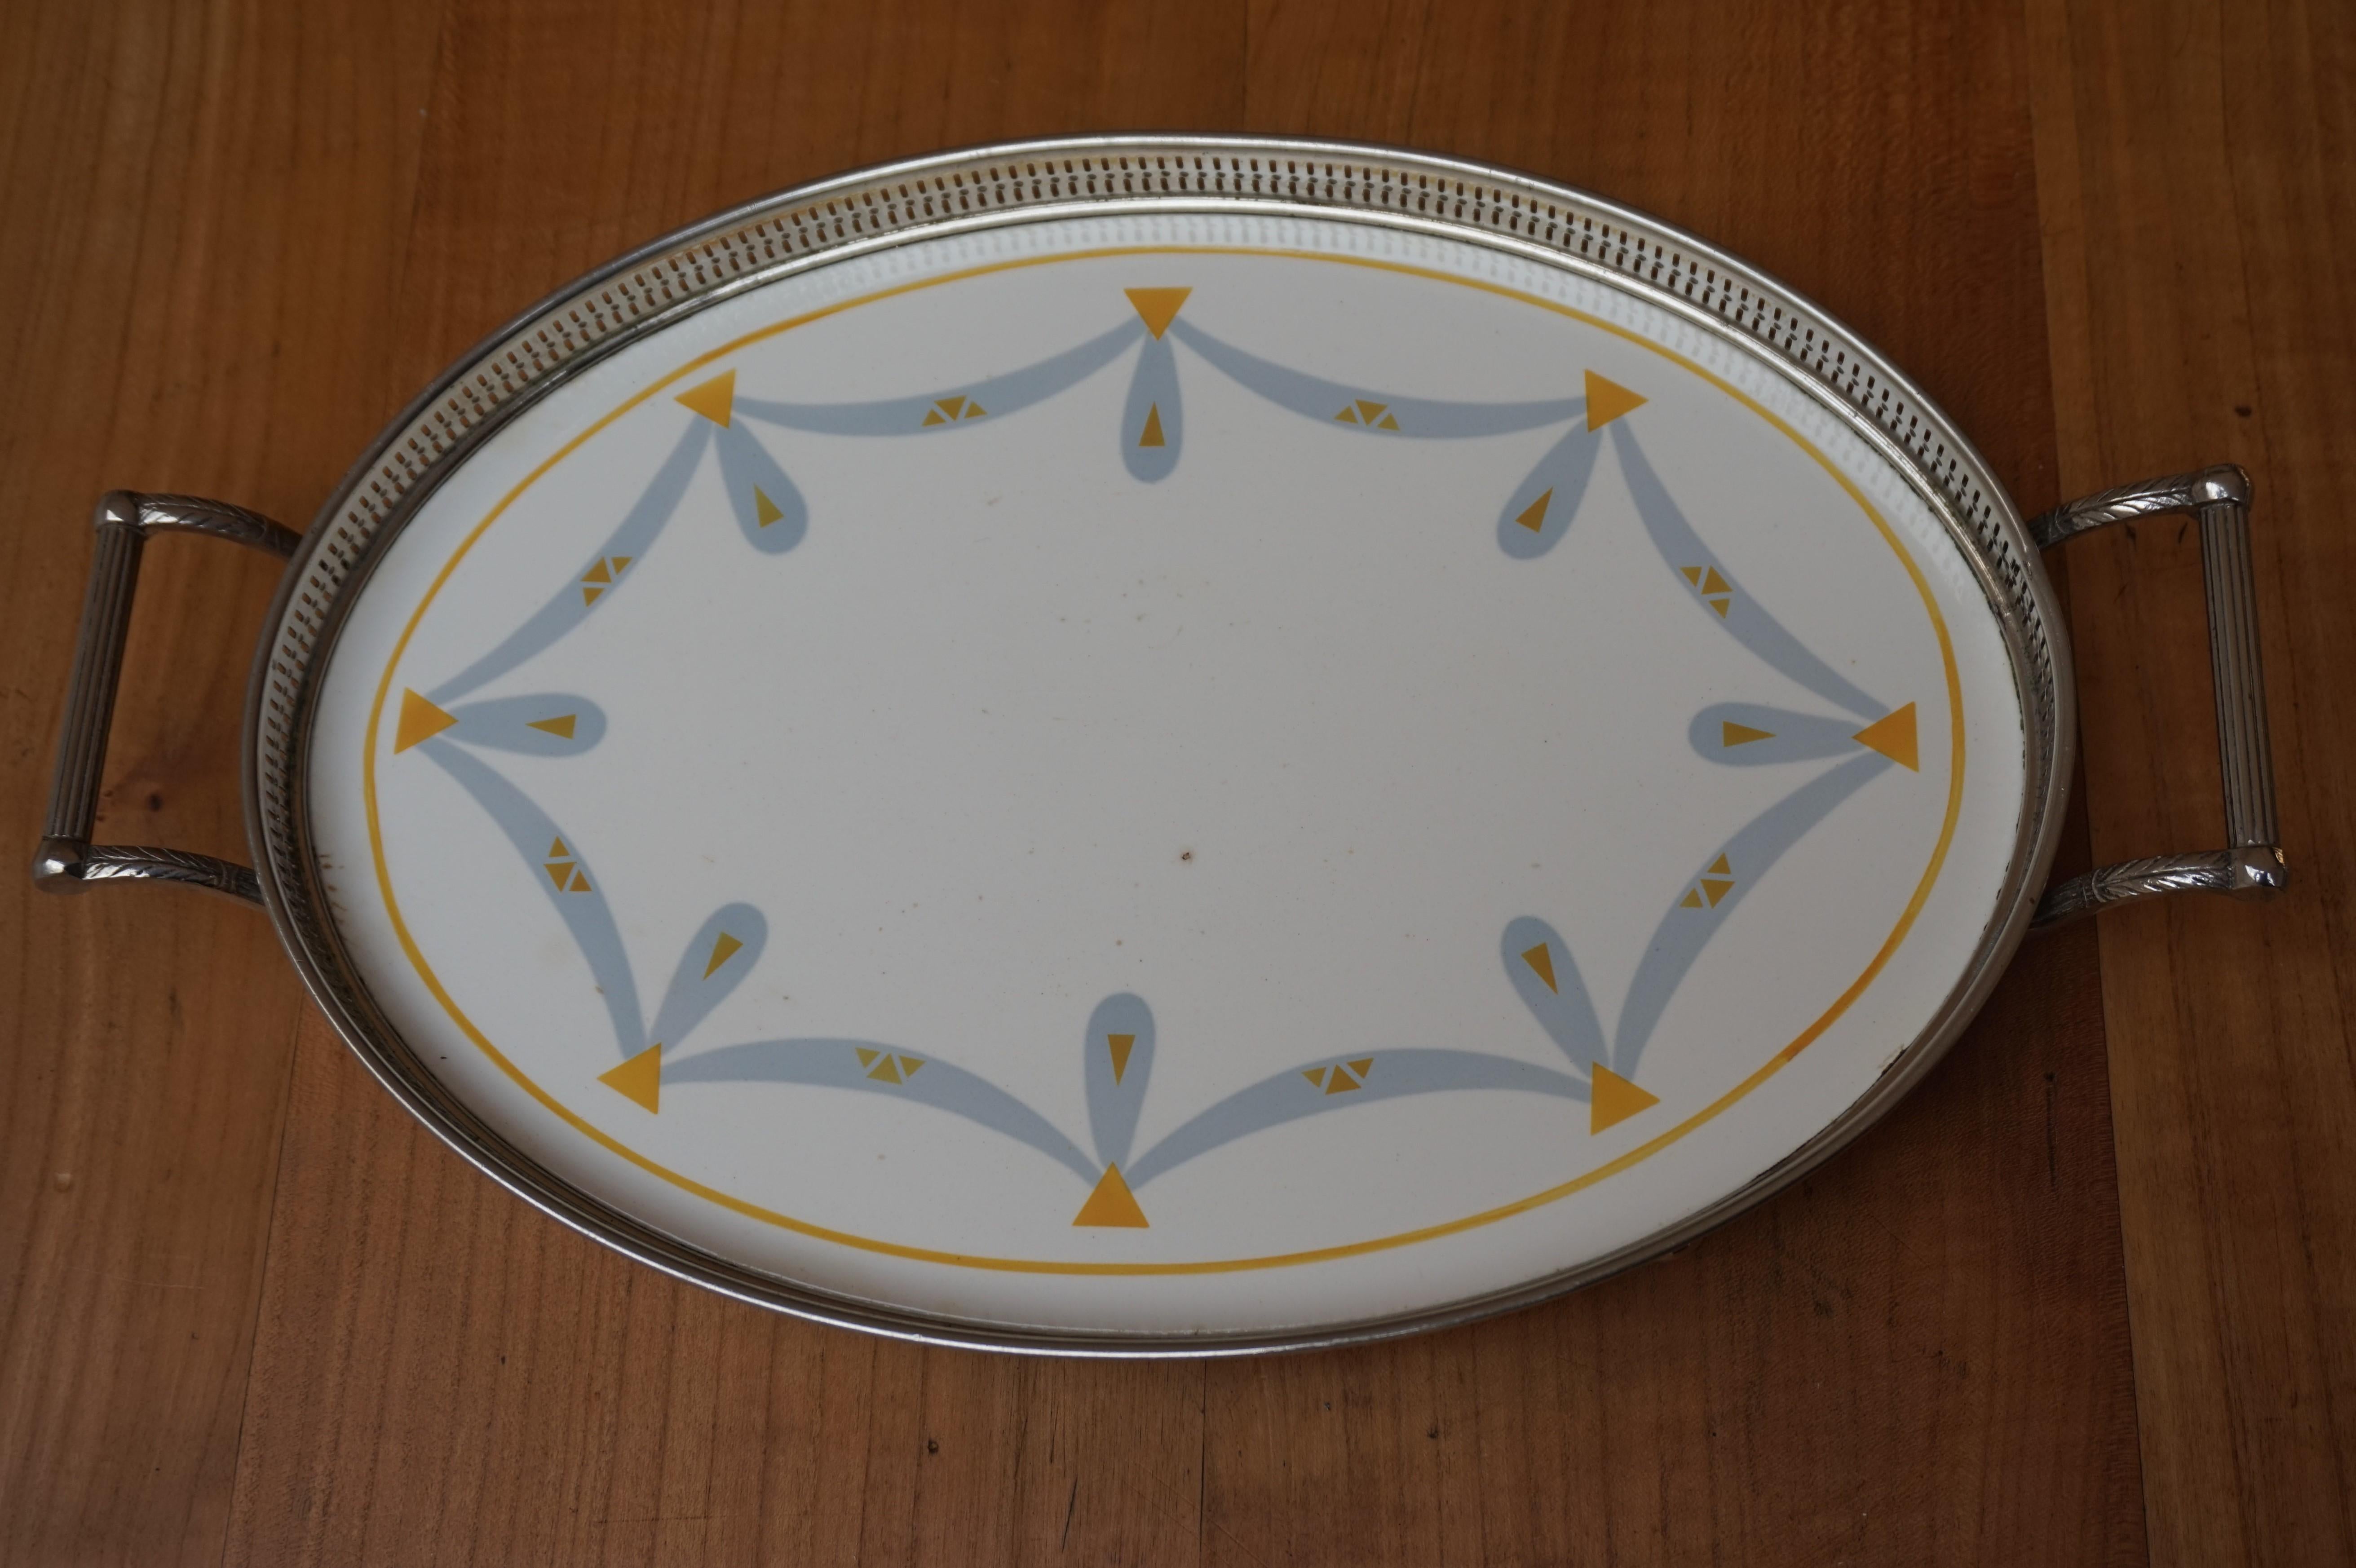 Small Art Deco Oval Porcelain Tile Serving Tray with Stylish Yellow & Gray Motif For Sale 9